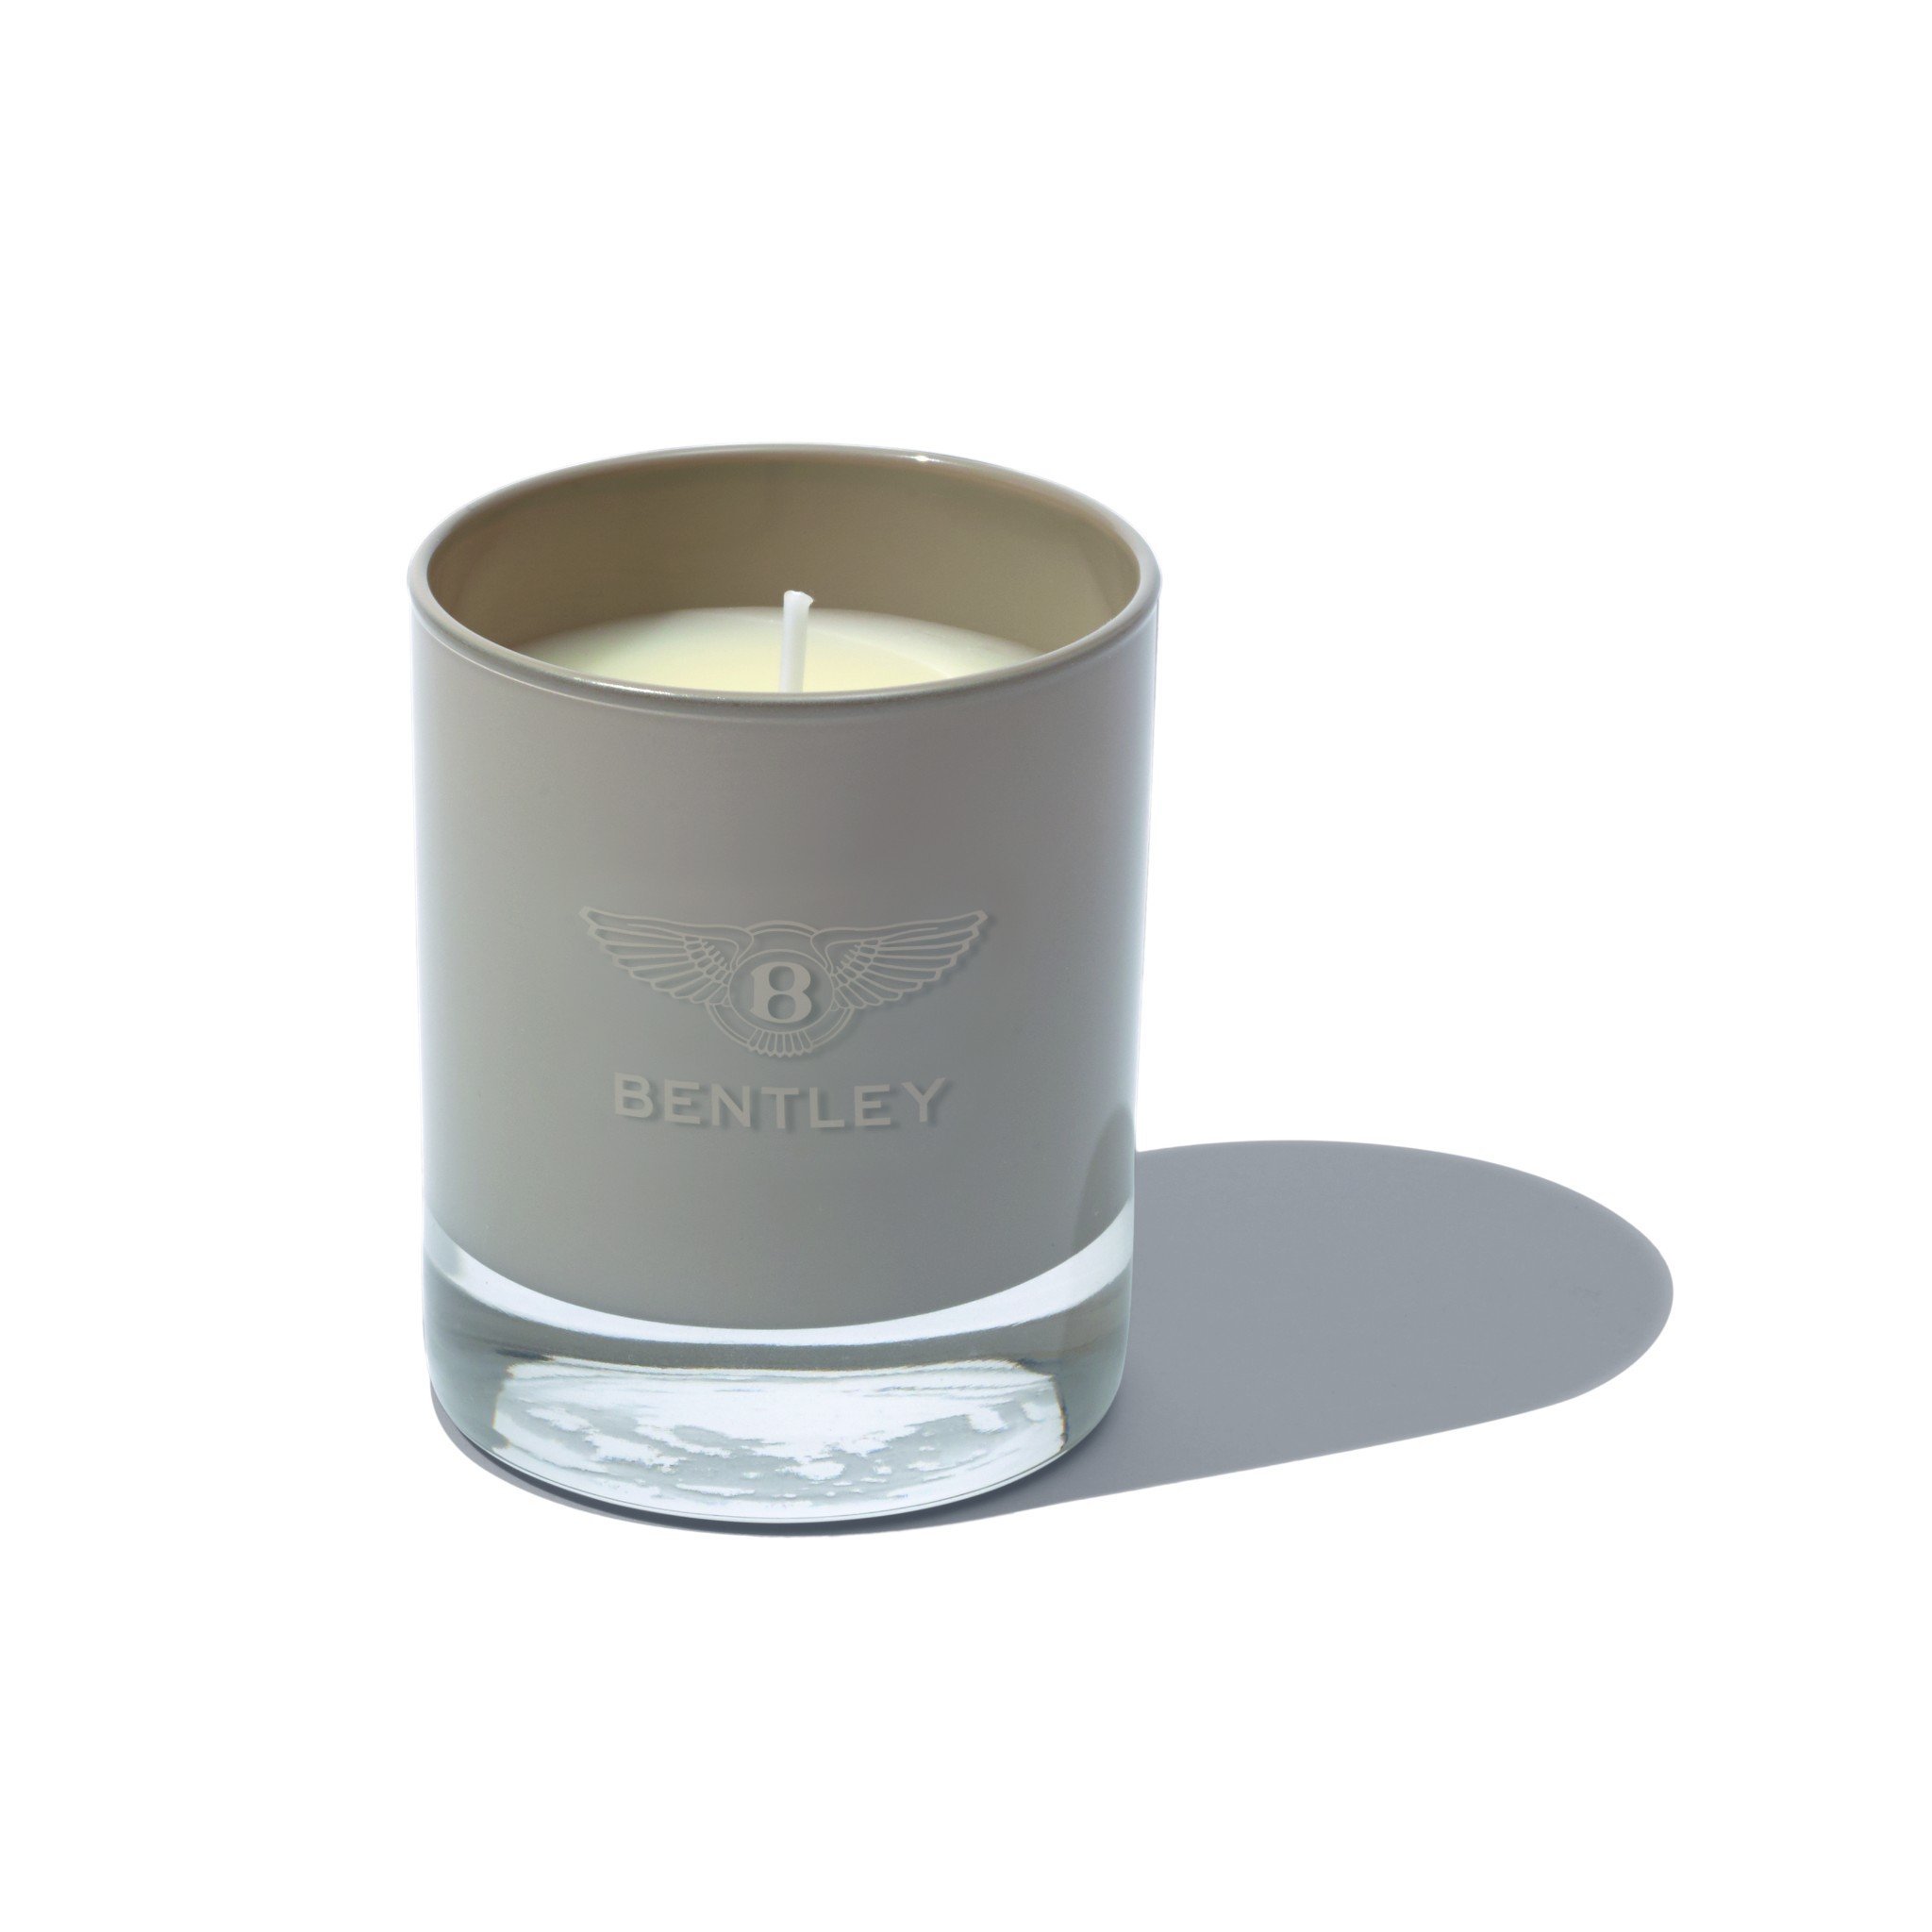 Candle Tergus 37 – The Bentley Collection